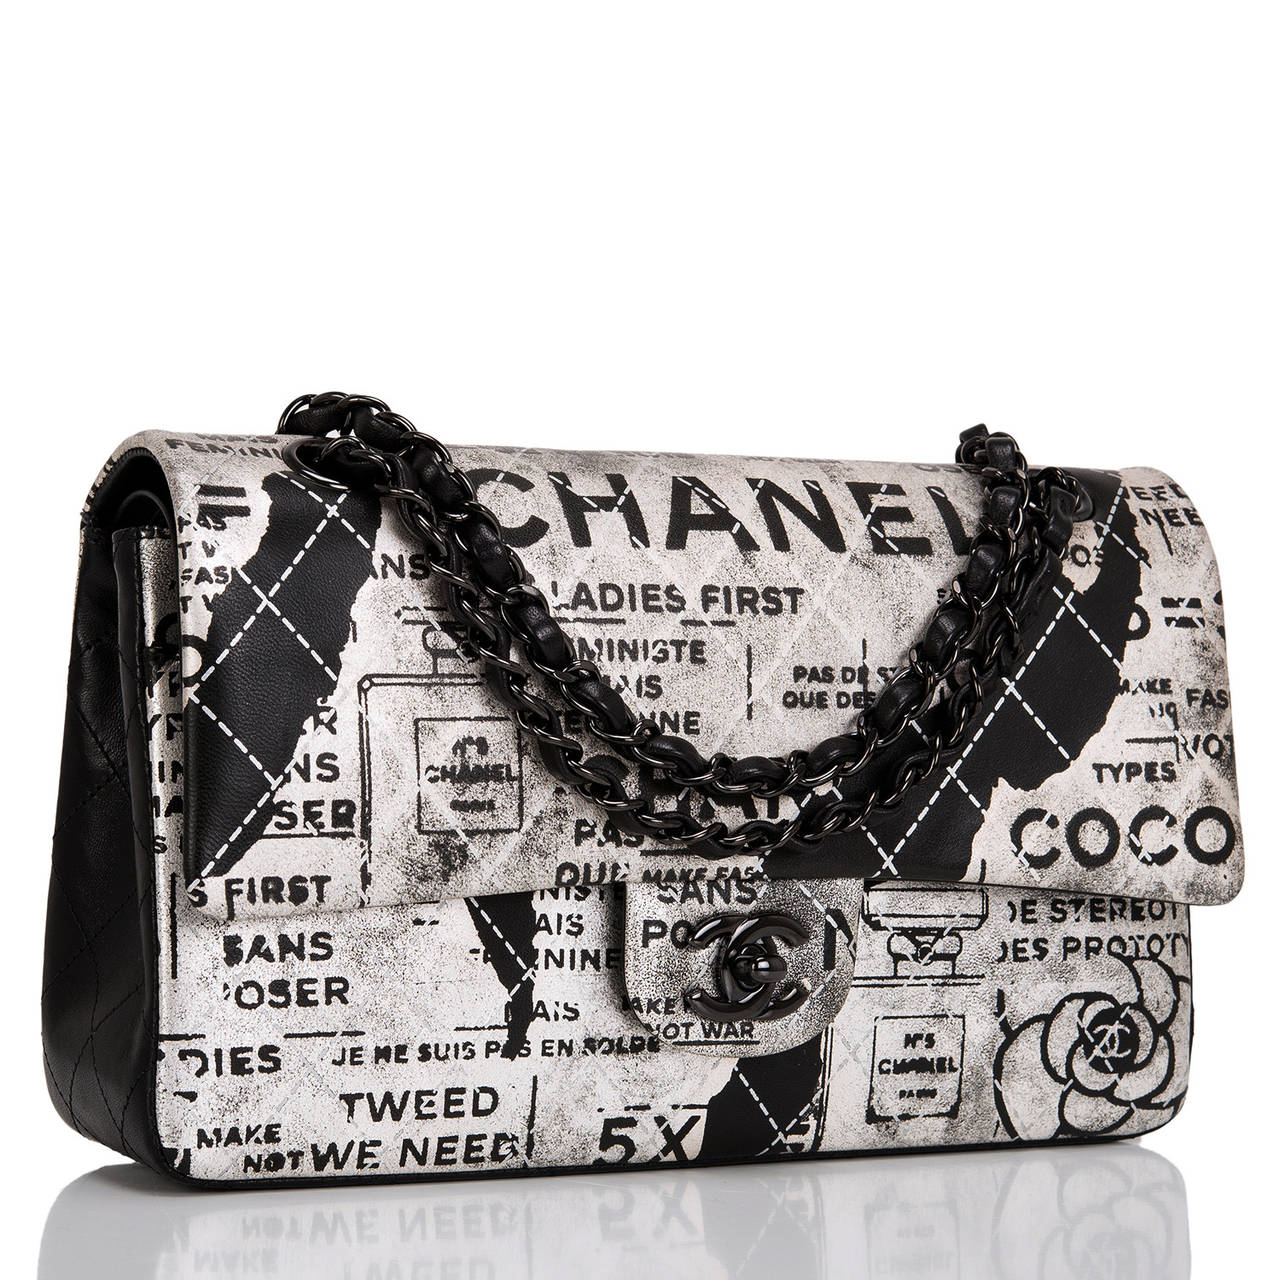 This limited edition Chanel Large Classic double flap features hand-painted black lambskin with silver painted detail. The bag features a front flap with signature black metal CC turnlock closure, half moon back pocket and an adjustable interwoven